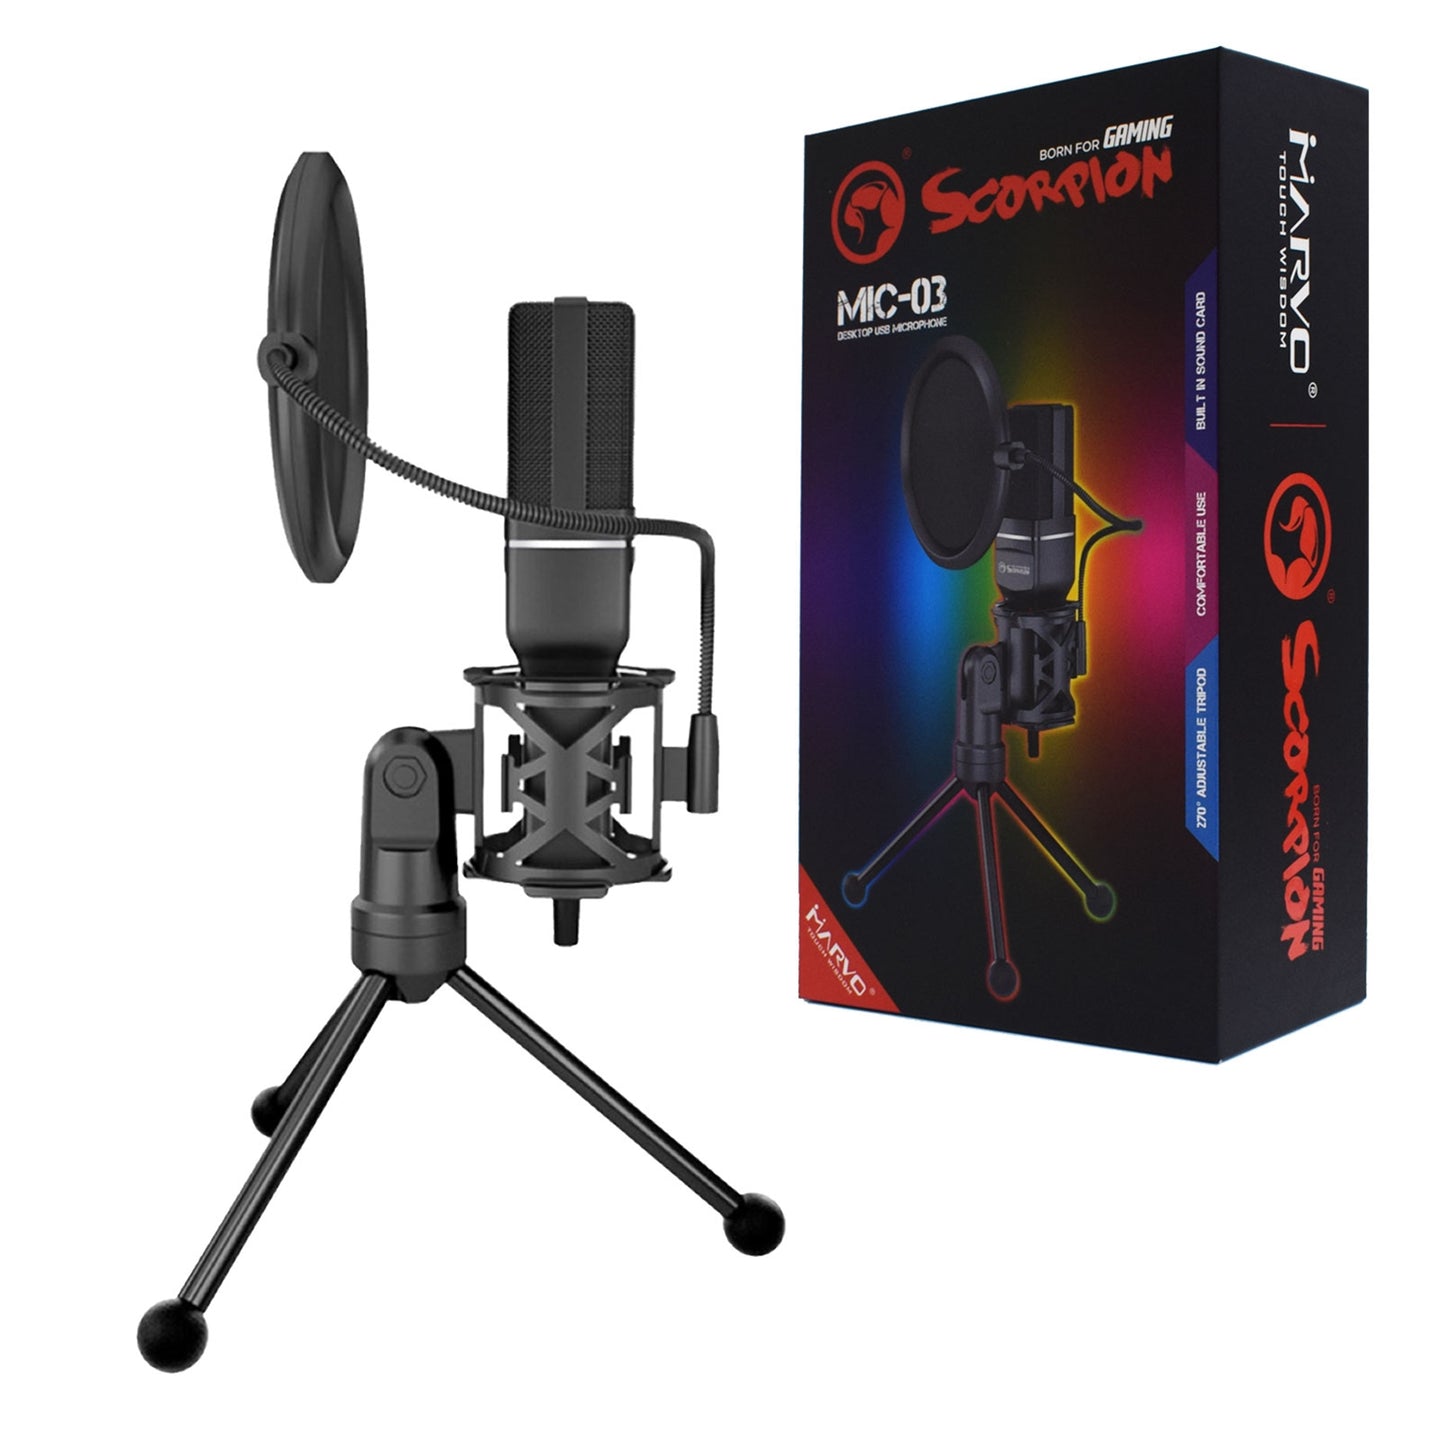 Marvo Scorpion MIC-03 Omnidirectional PRO Streaming Microphone 3D stereo live sound